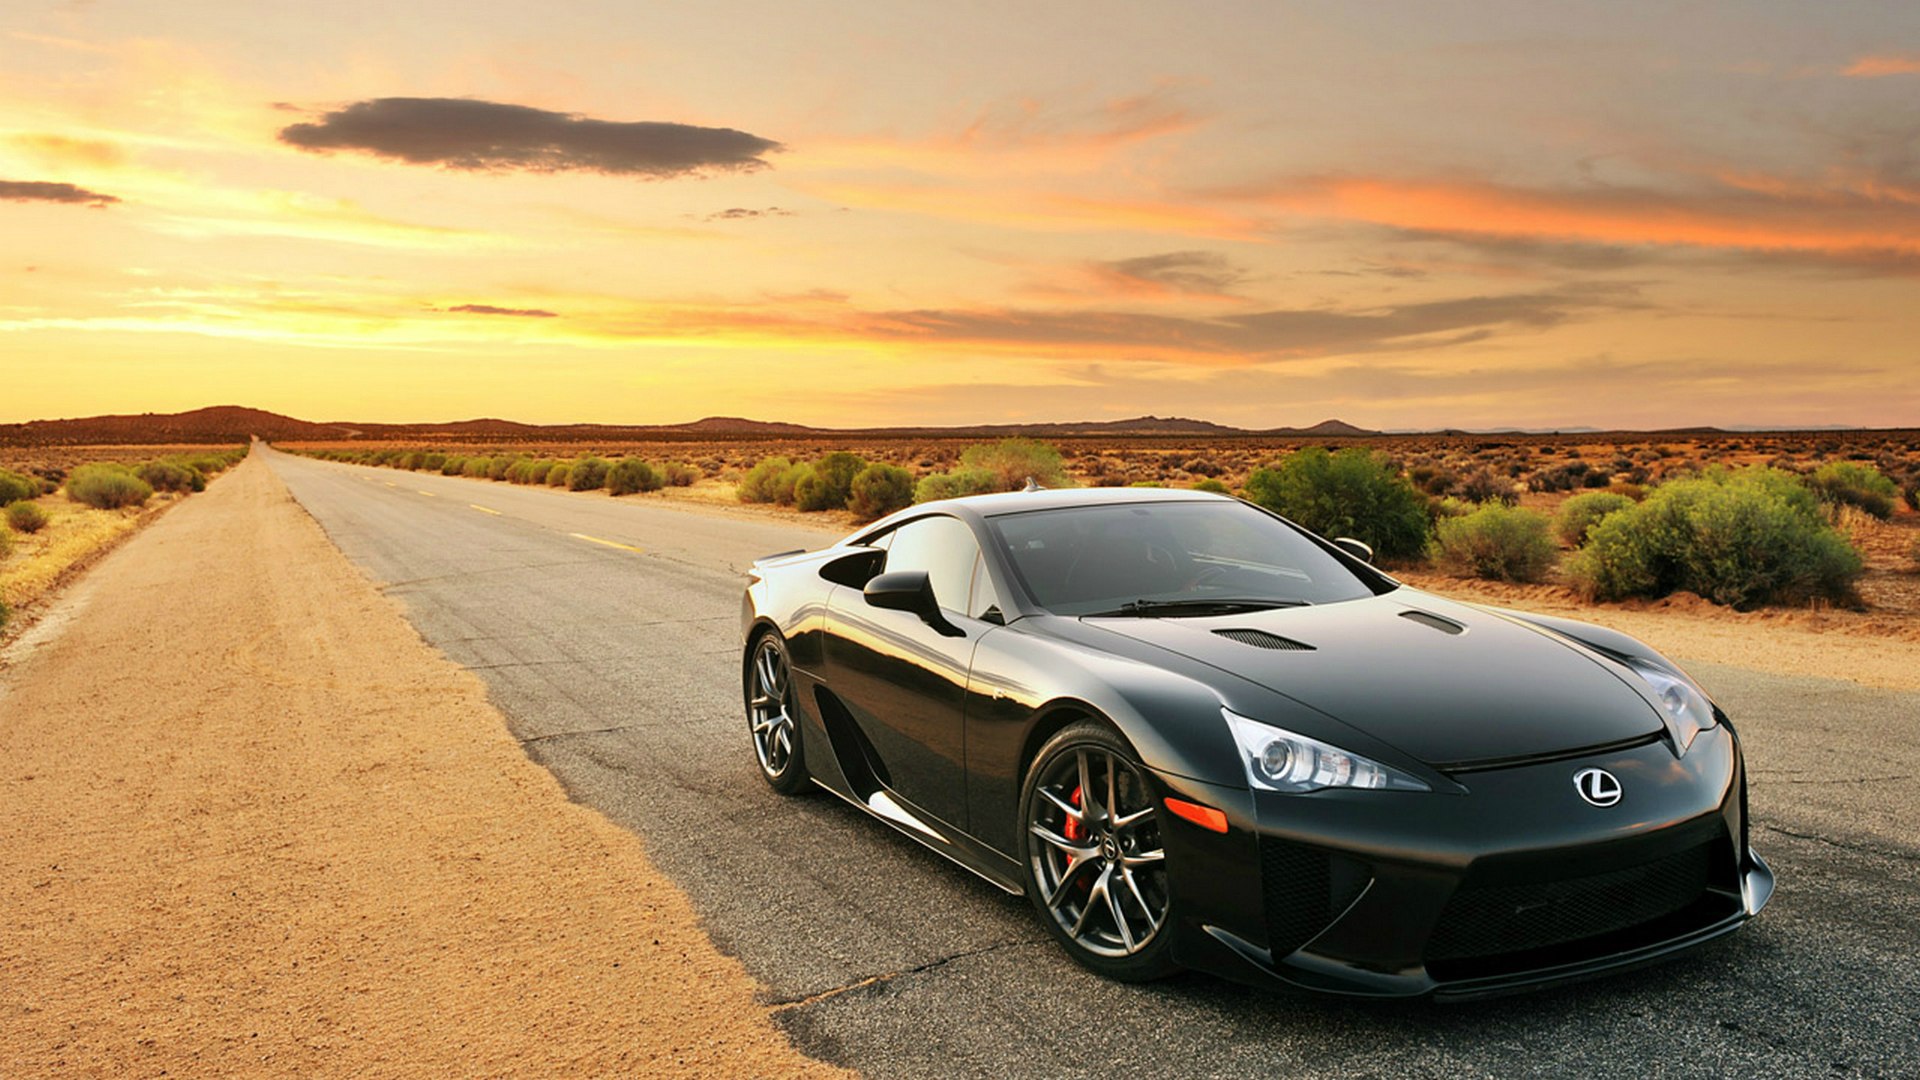 Lexus LFA sports car wallpapers and images - wallpapers, pictures, photos